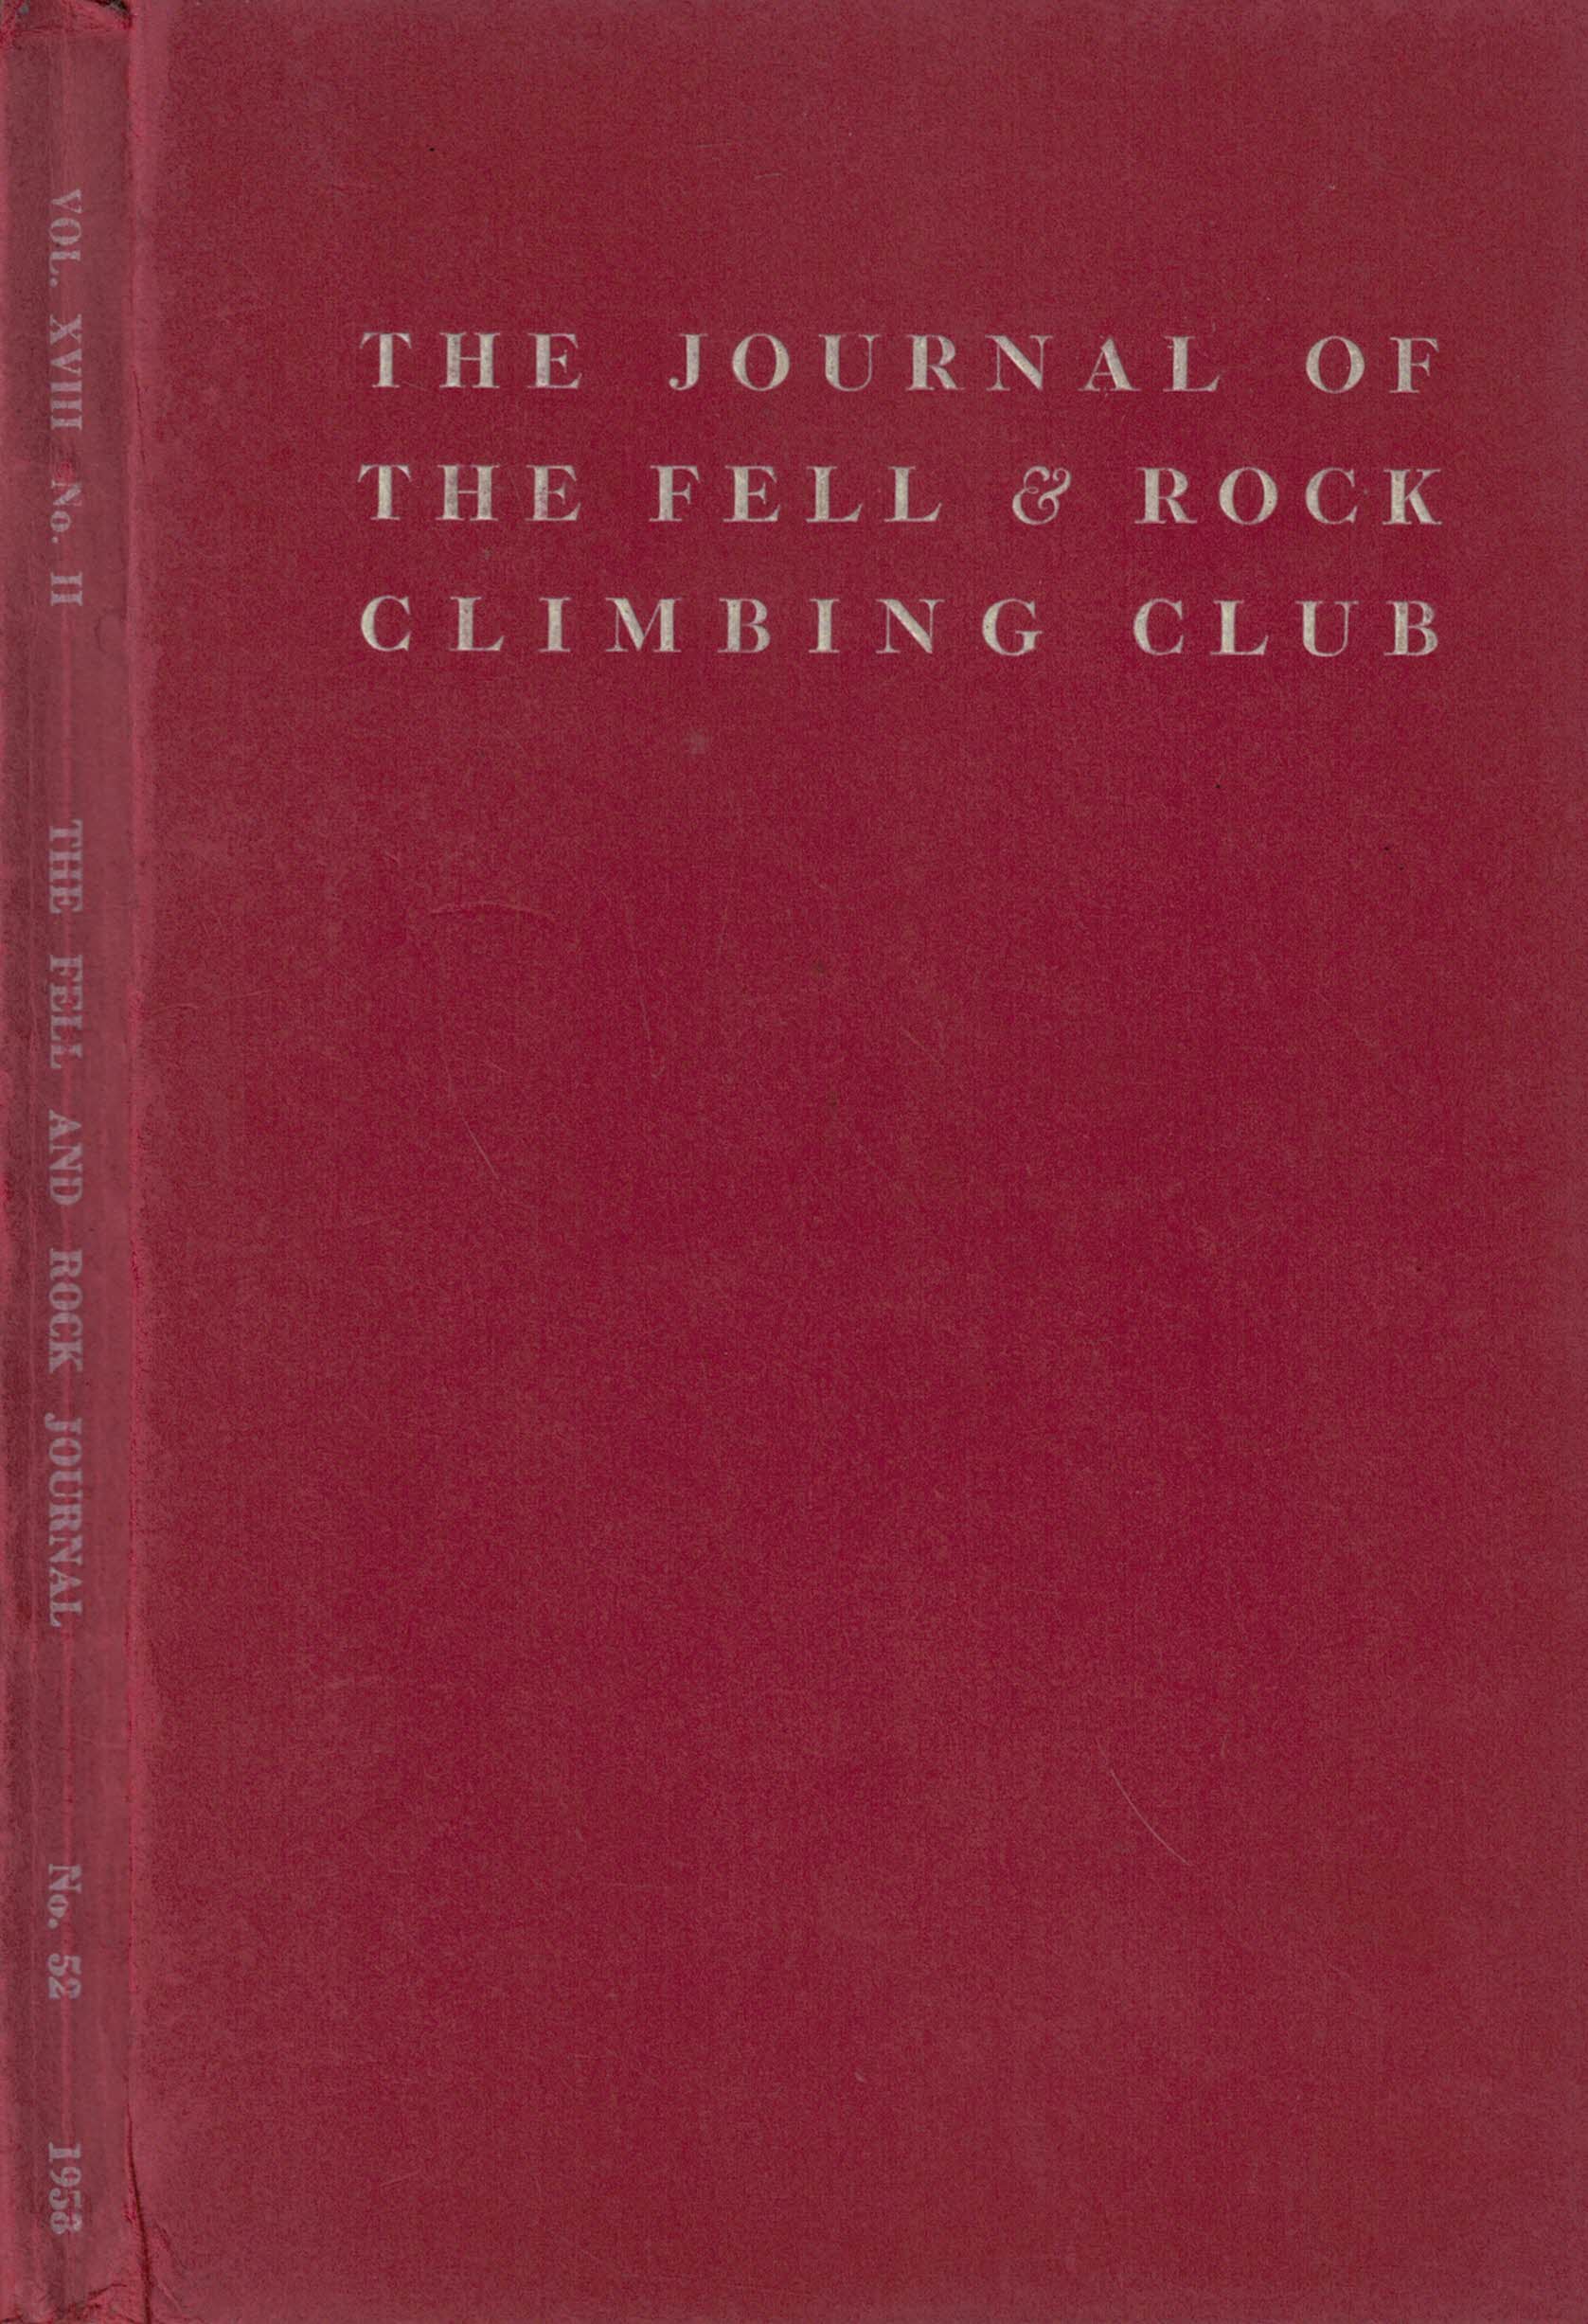 The Journal of the Fell & Rock Climbing Club of the English Lake District. No 52. (Volume 18 No 2) 1958.